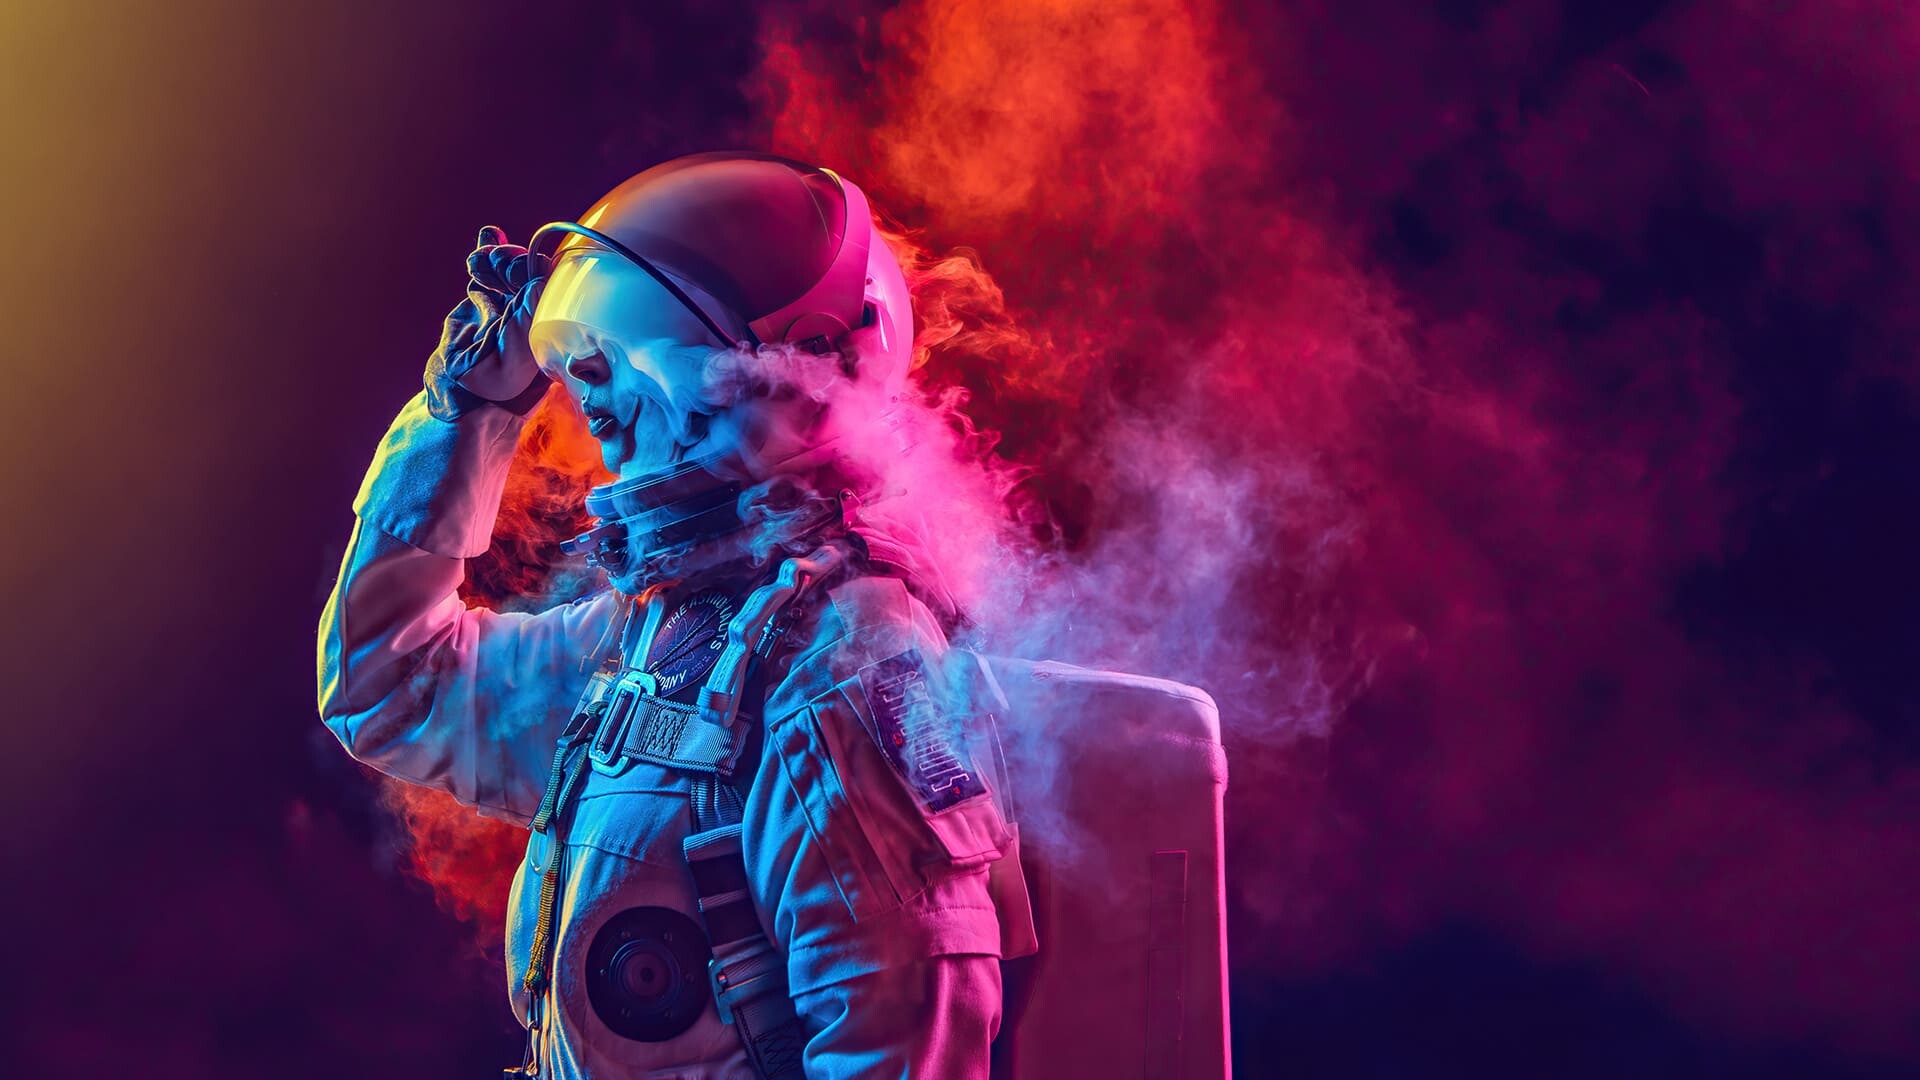 Astronaut: Space wanderer, Performing arts, Visual effects, Cosmic. 1920x1080 Full HD Background.